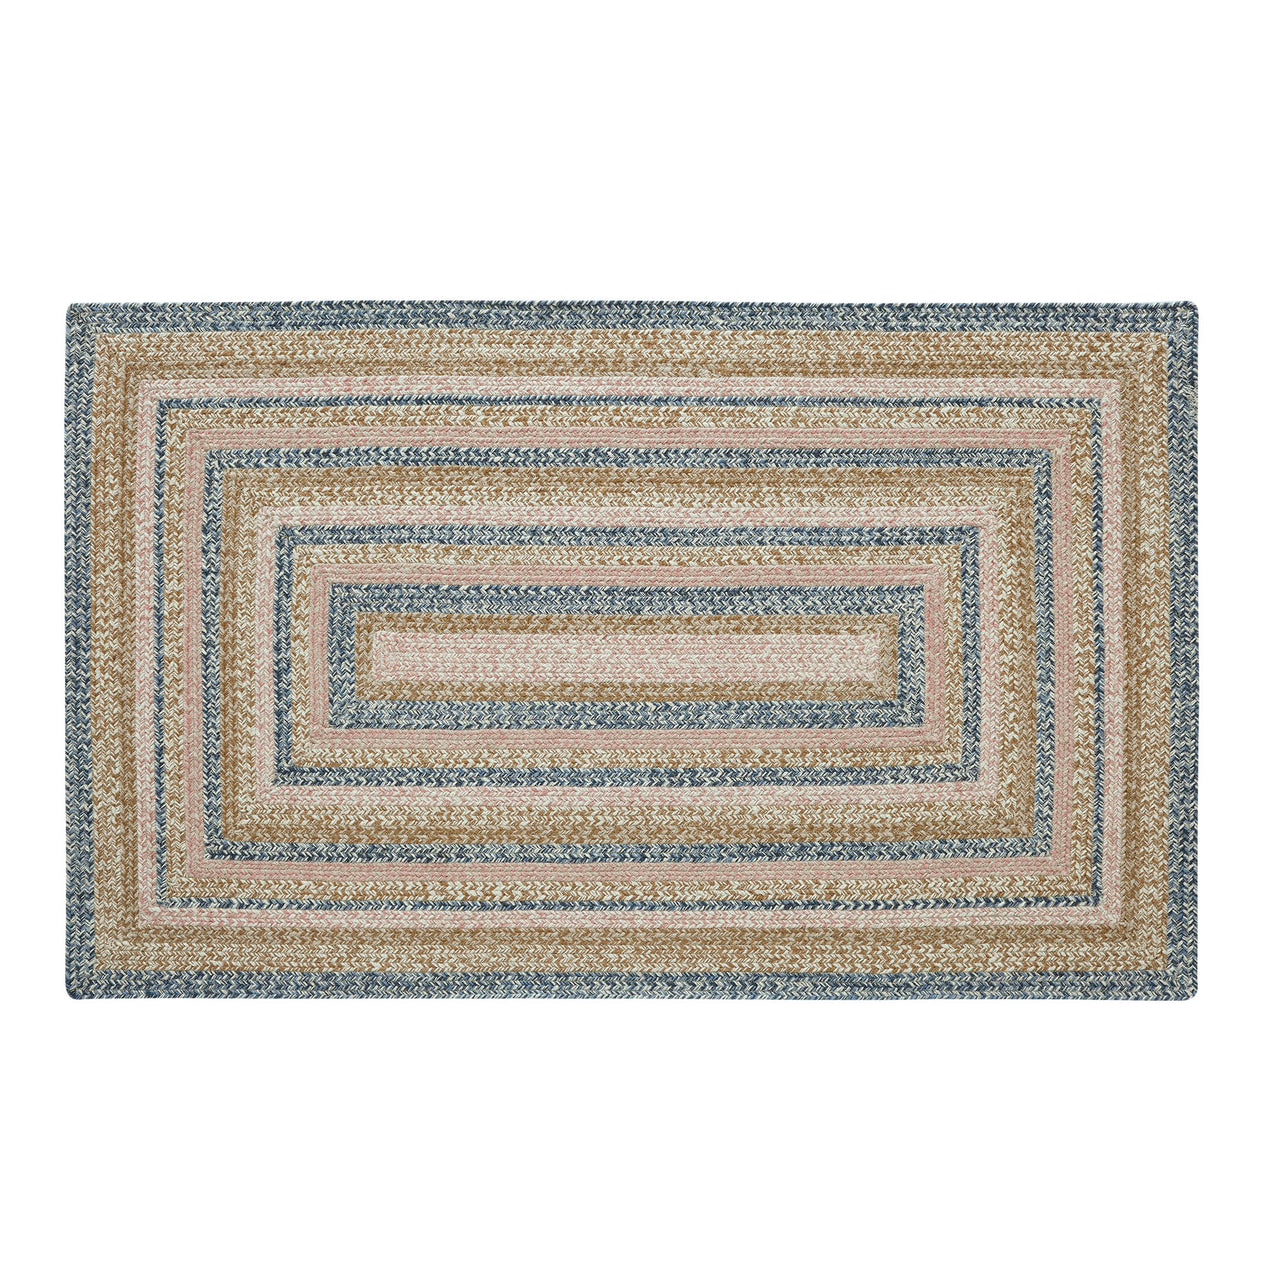 Kaila Jute Braided Rug Rect. with Rug Pad 36"x60" (3'x5') VHC Brands